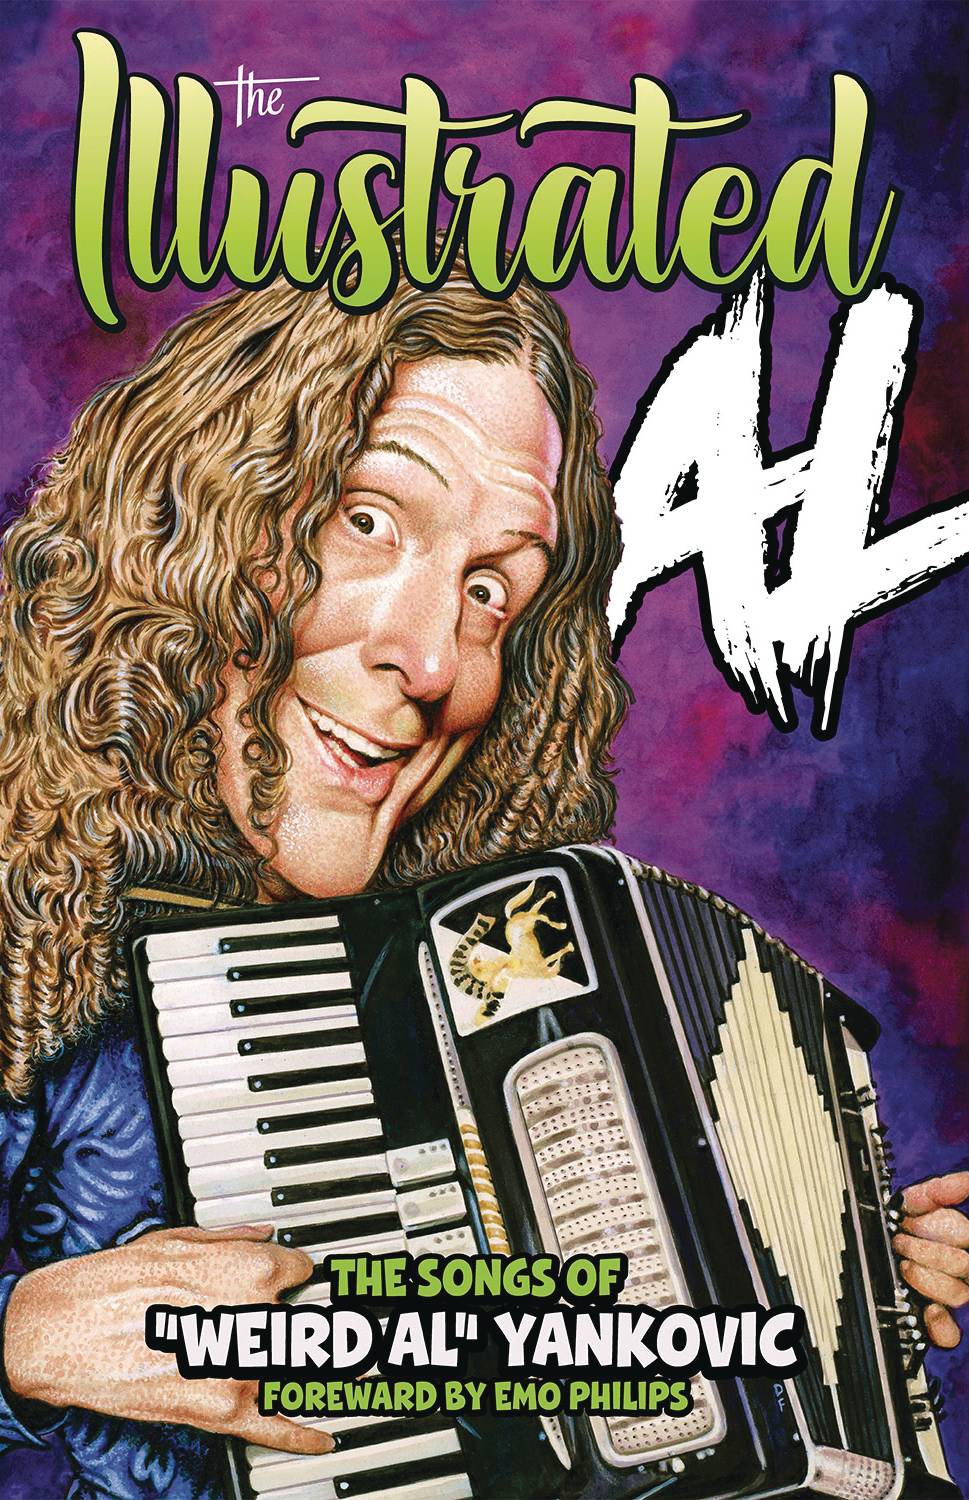 The One Stop Shop Comics & Games Illustrated Al Songs Of Weird Al Yankovic Hc (Mr) (C: 0-1-2) (11/23/2022) Z2 COMICS